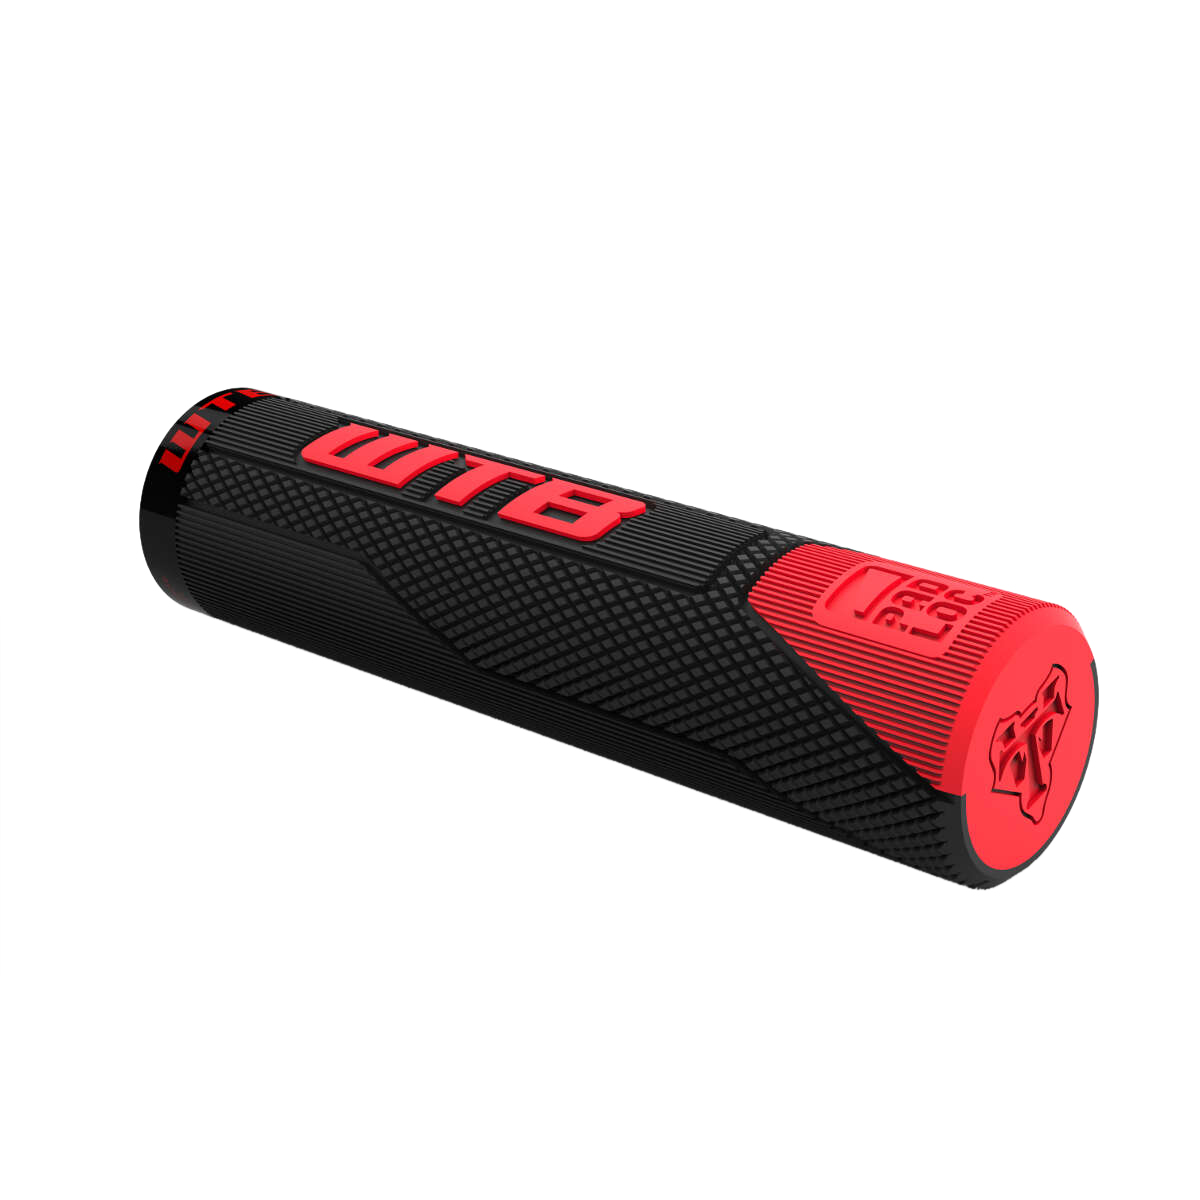 WTB MTB Grips Clydesdale PadLoc Black/Red